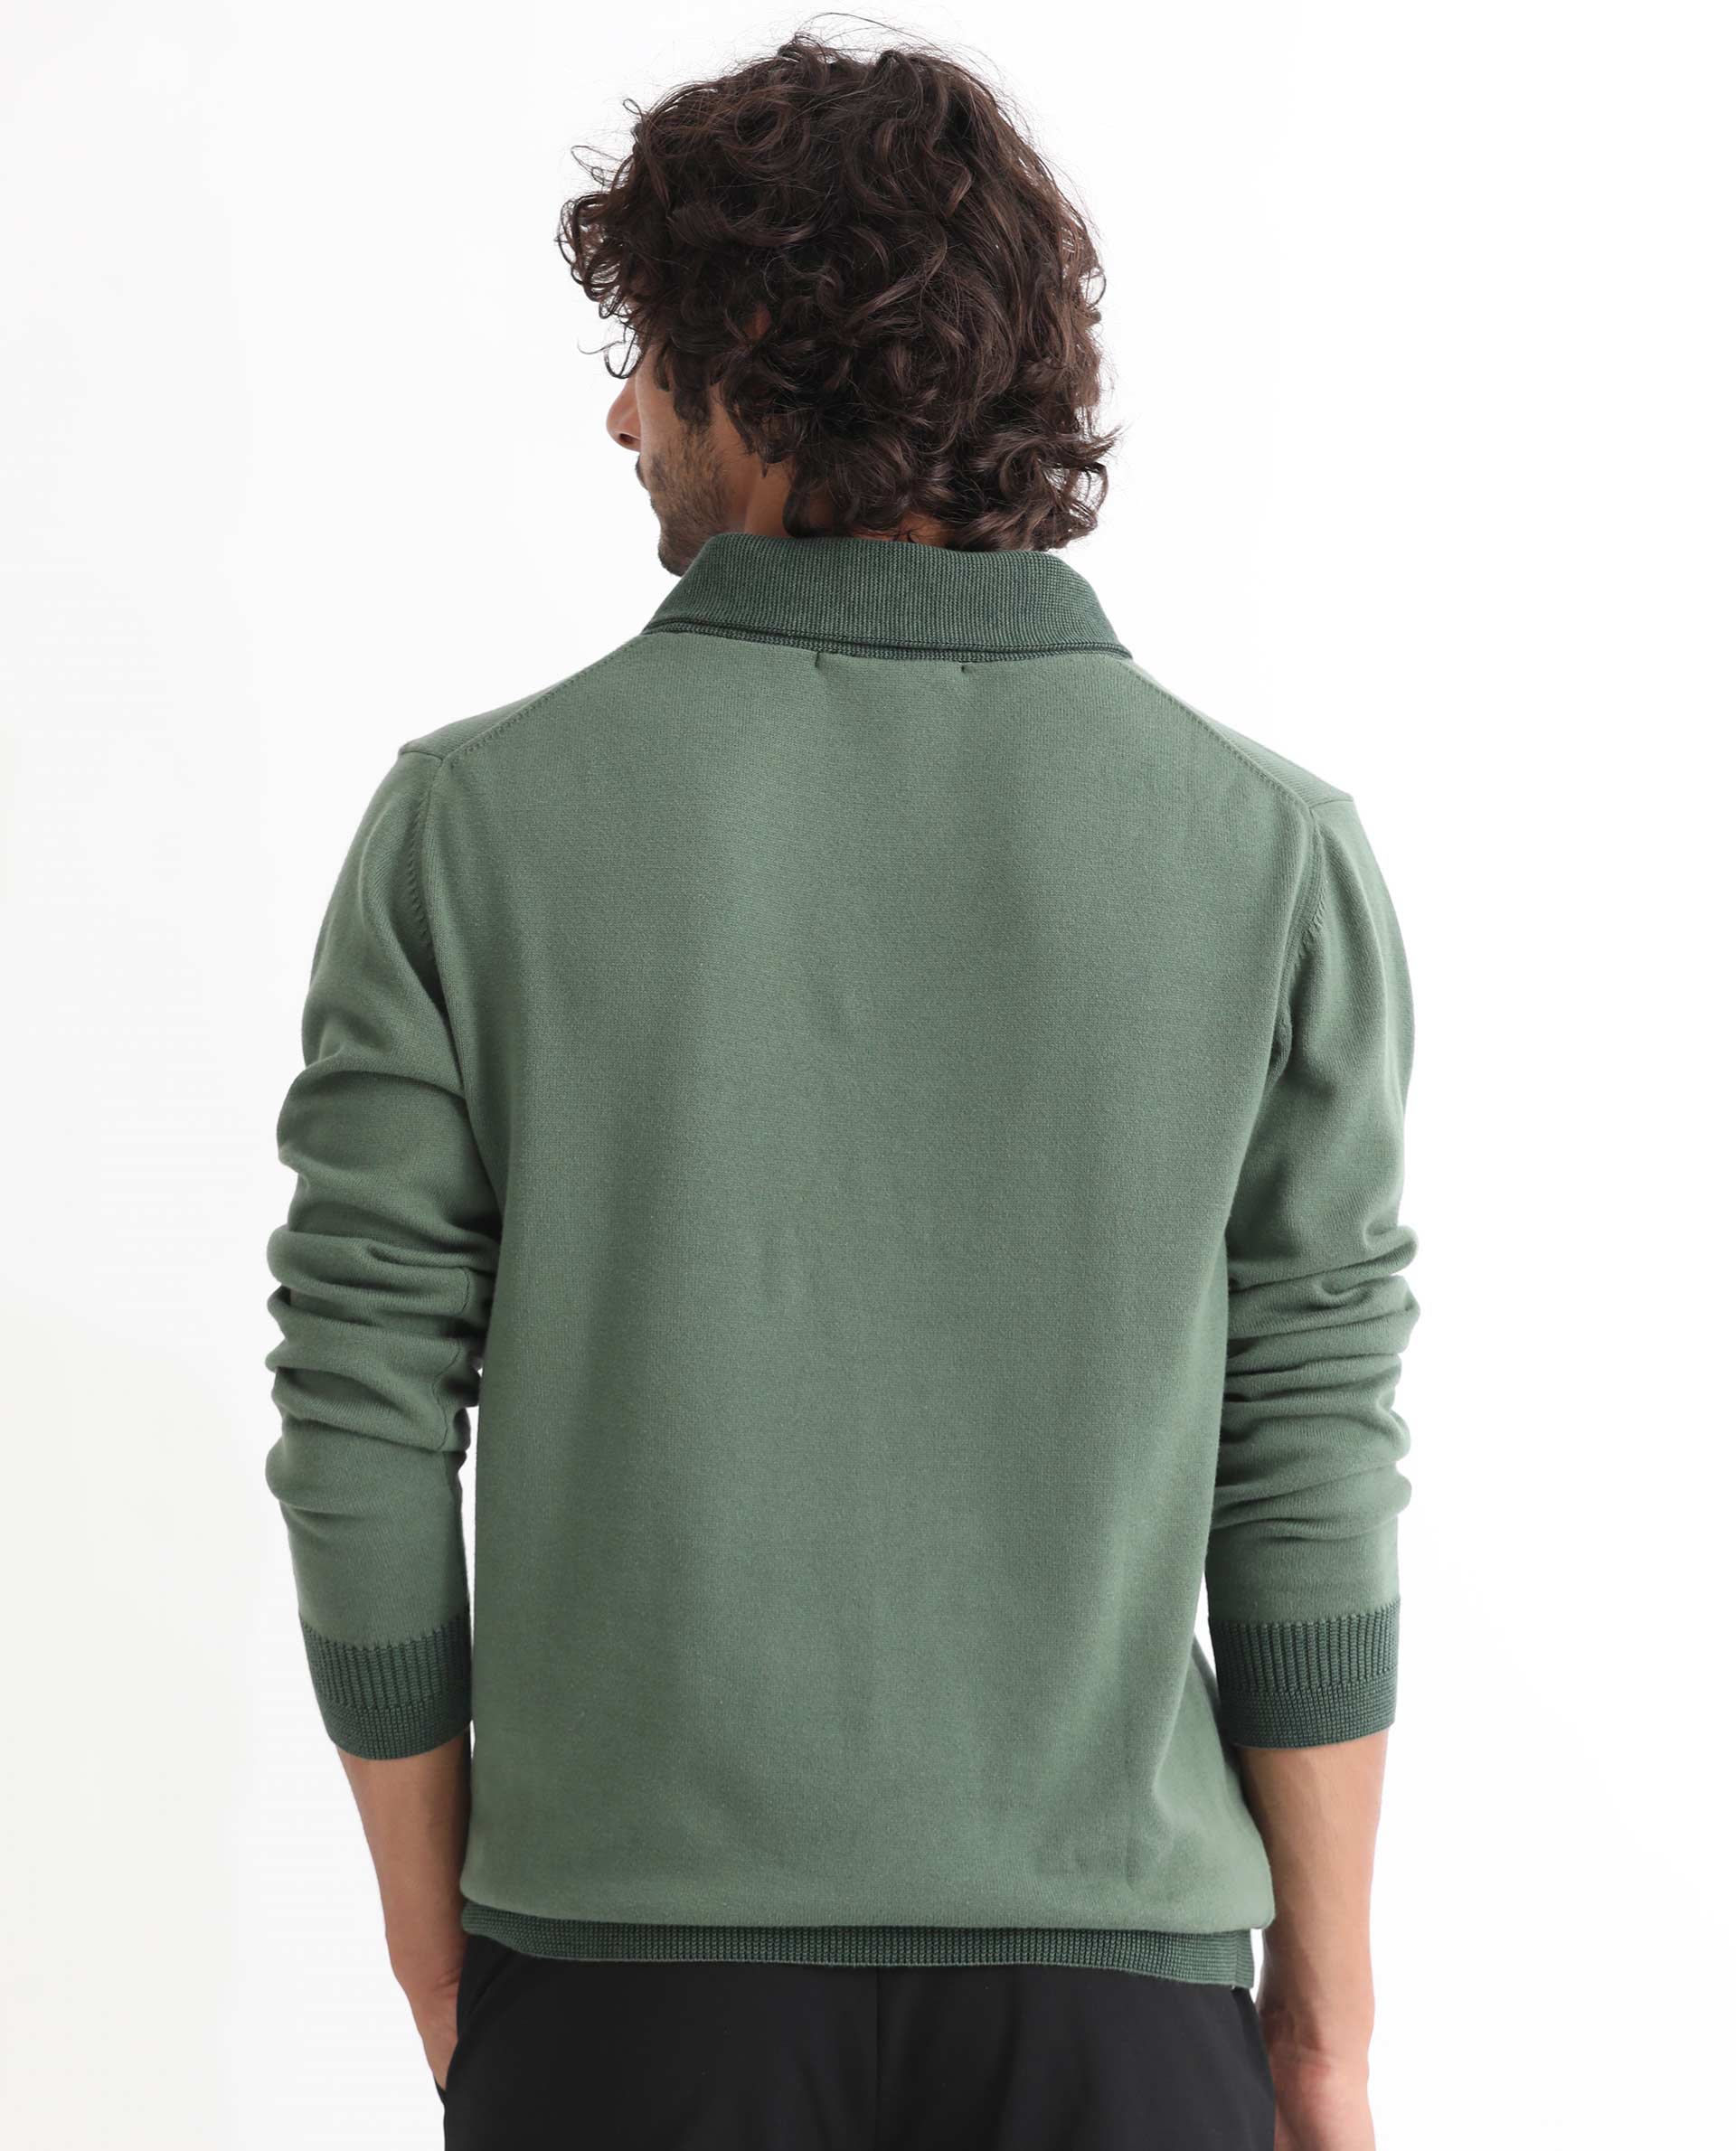 Men's Irish Cowlneck Pullover Sweater - Green | Celtic Clothing Company